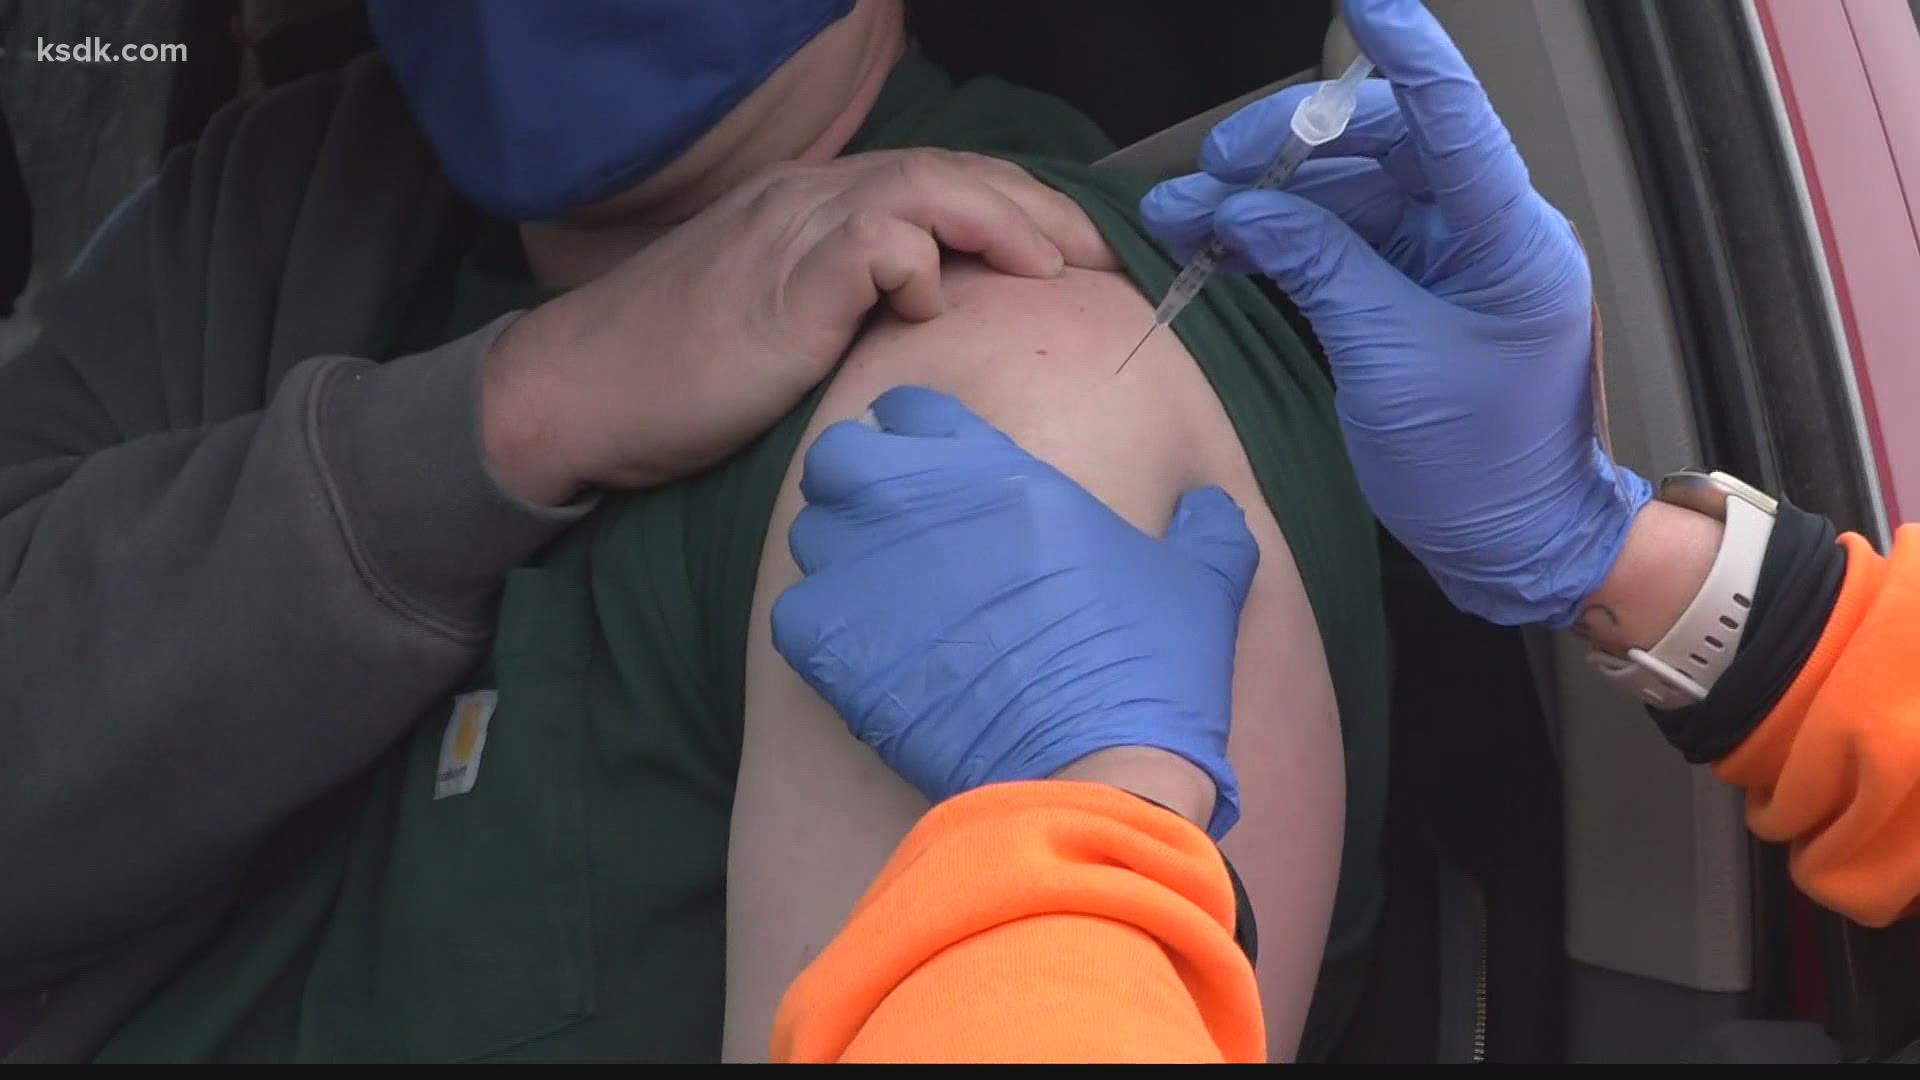 Some superintendents and health officials are left wondering why they can't secure the vaccine